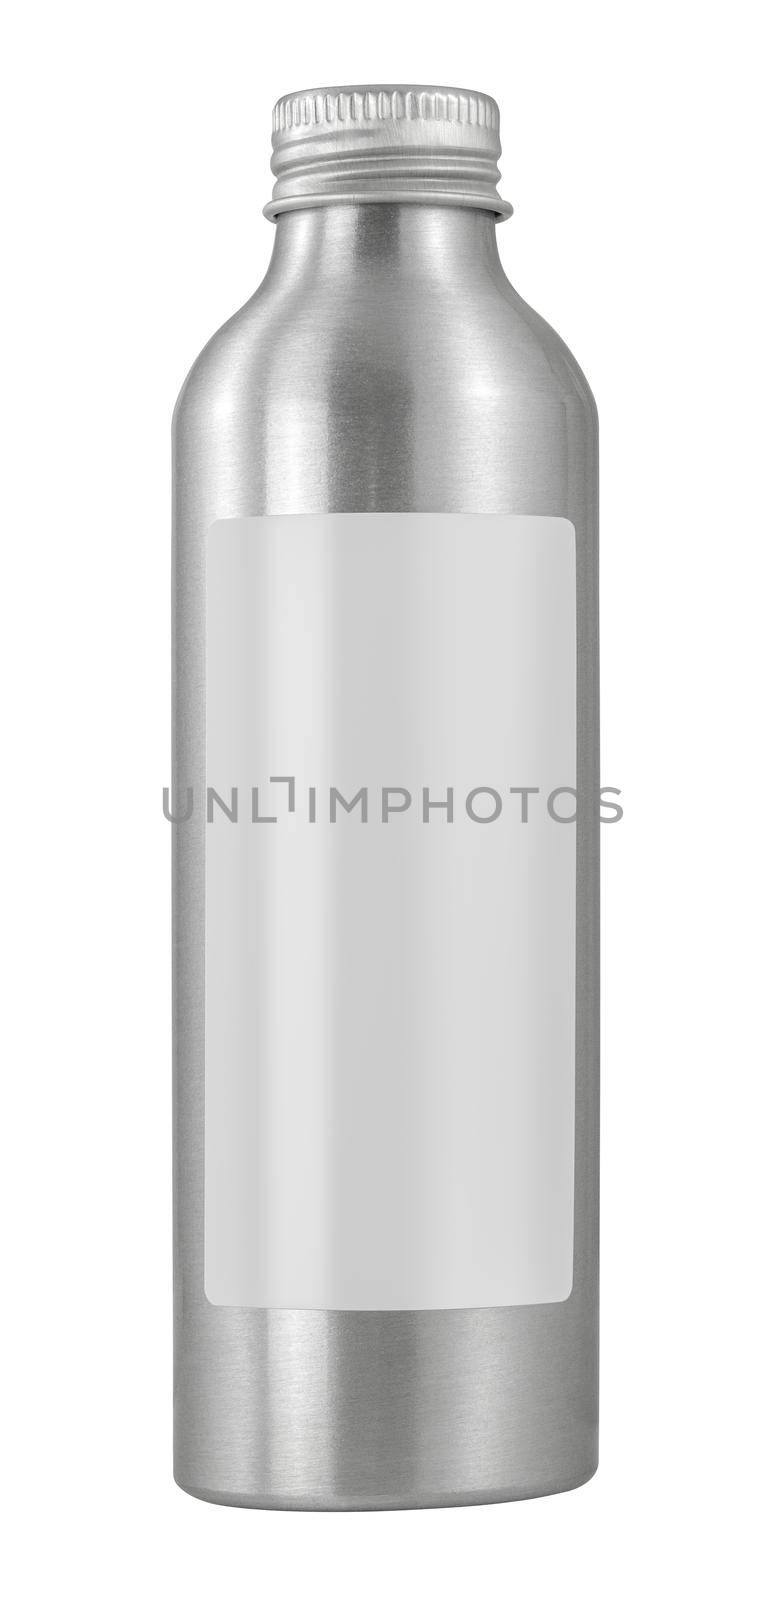 Aluminum Bottle With Blank Label by mrdoomits